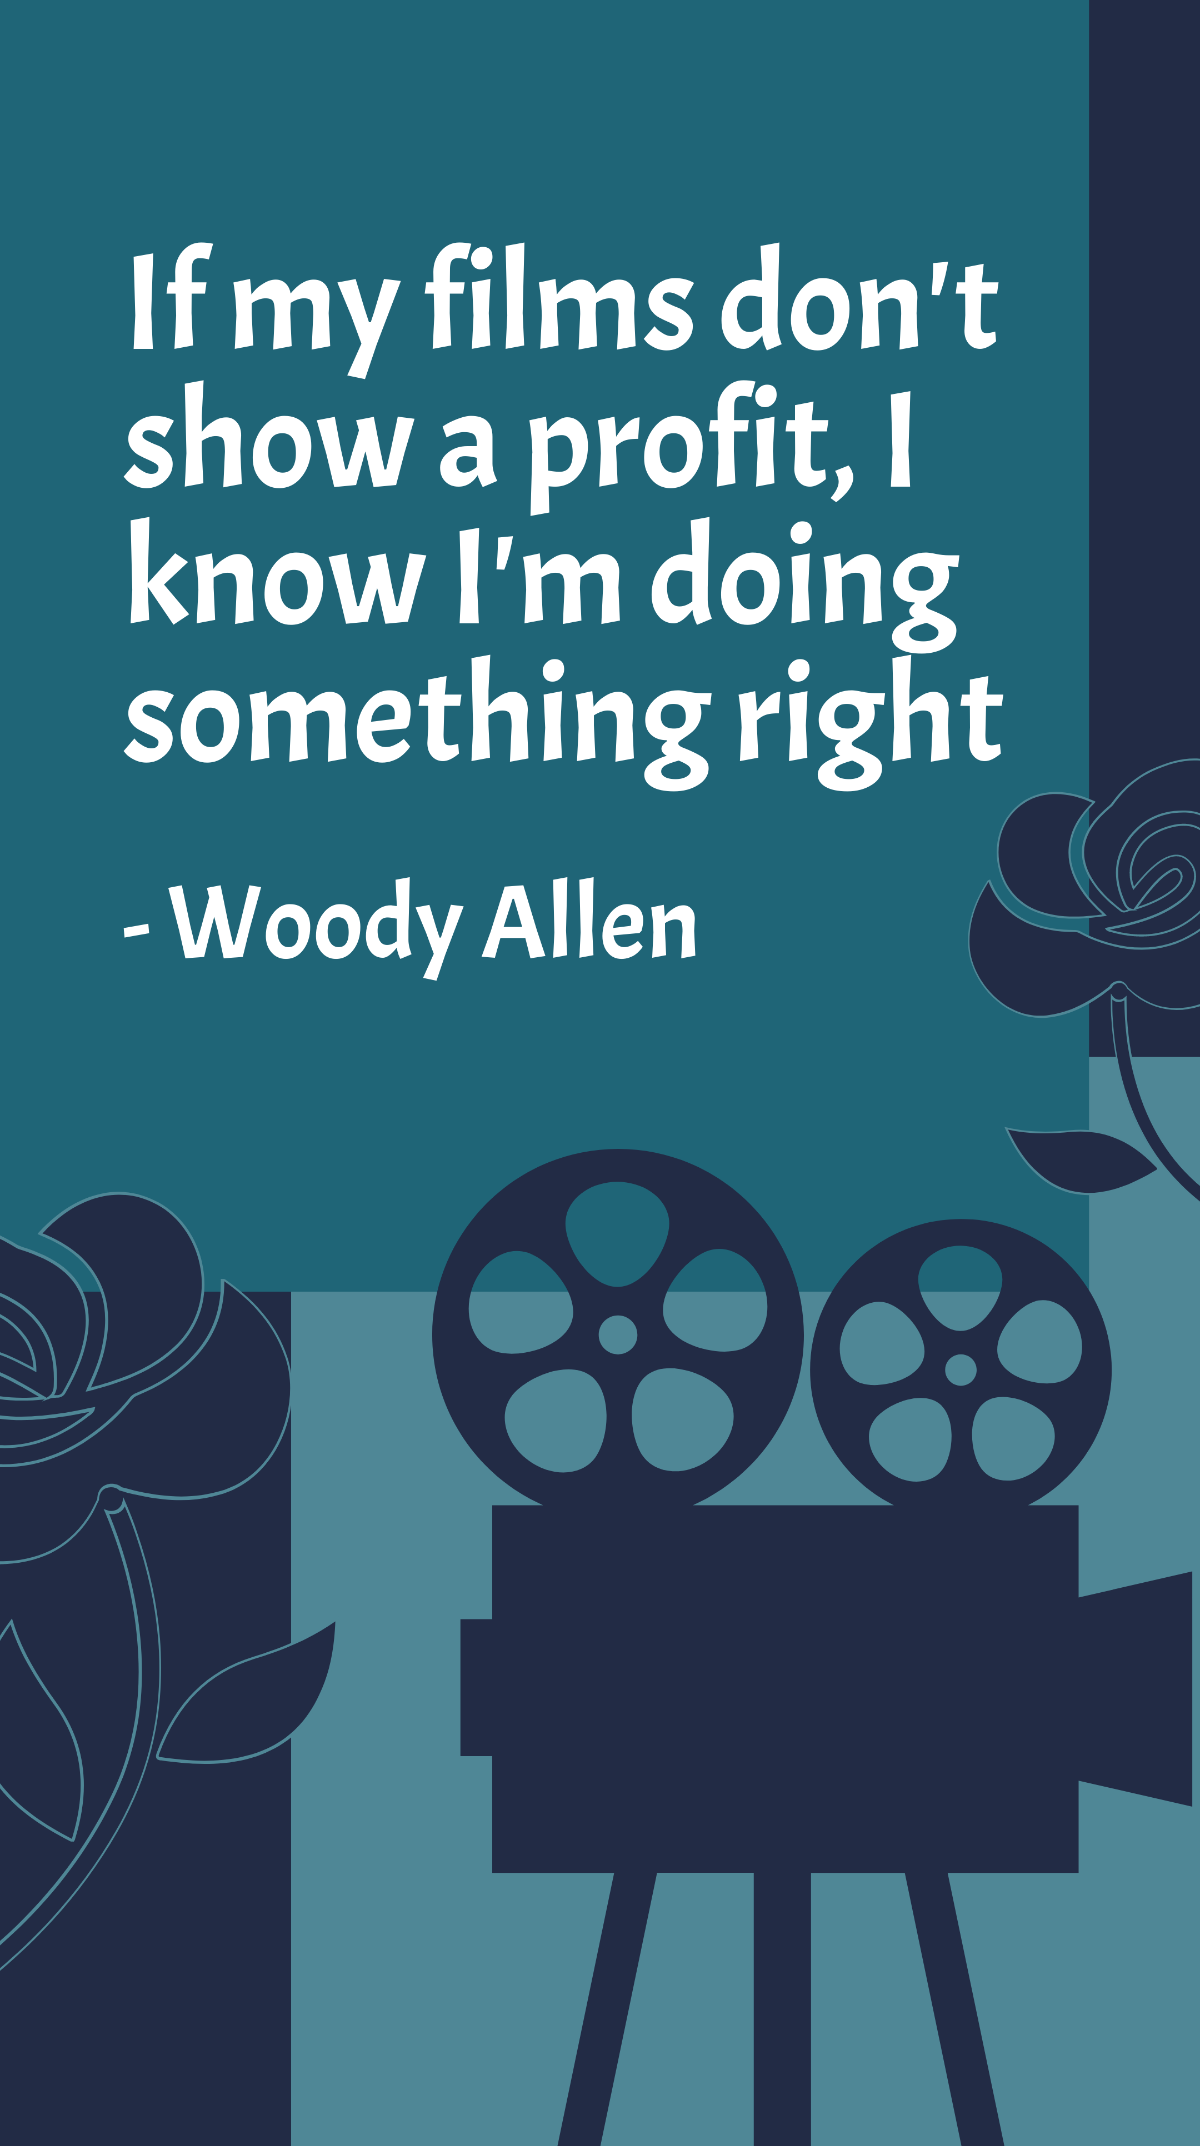 Woody Allen - If my films don't show a profit, I know I'm doing something right